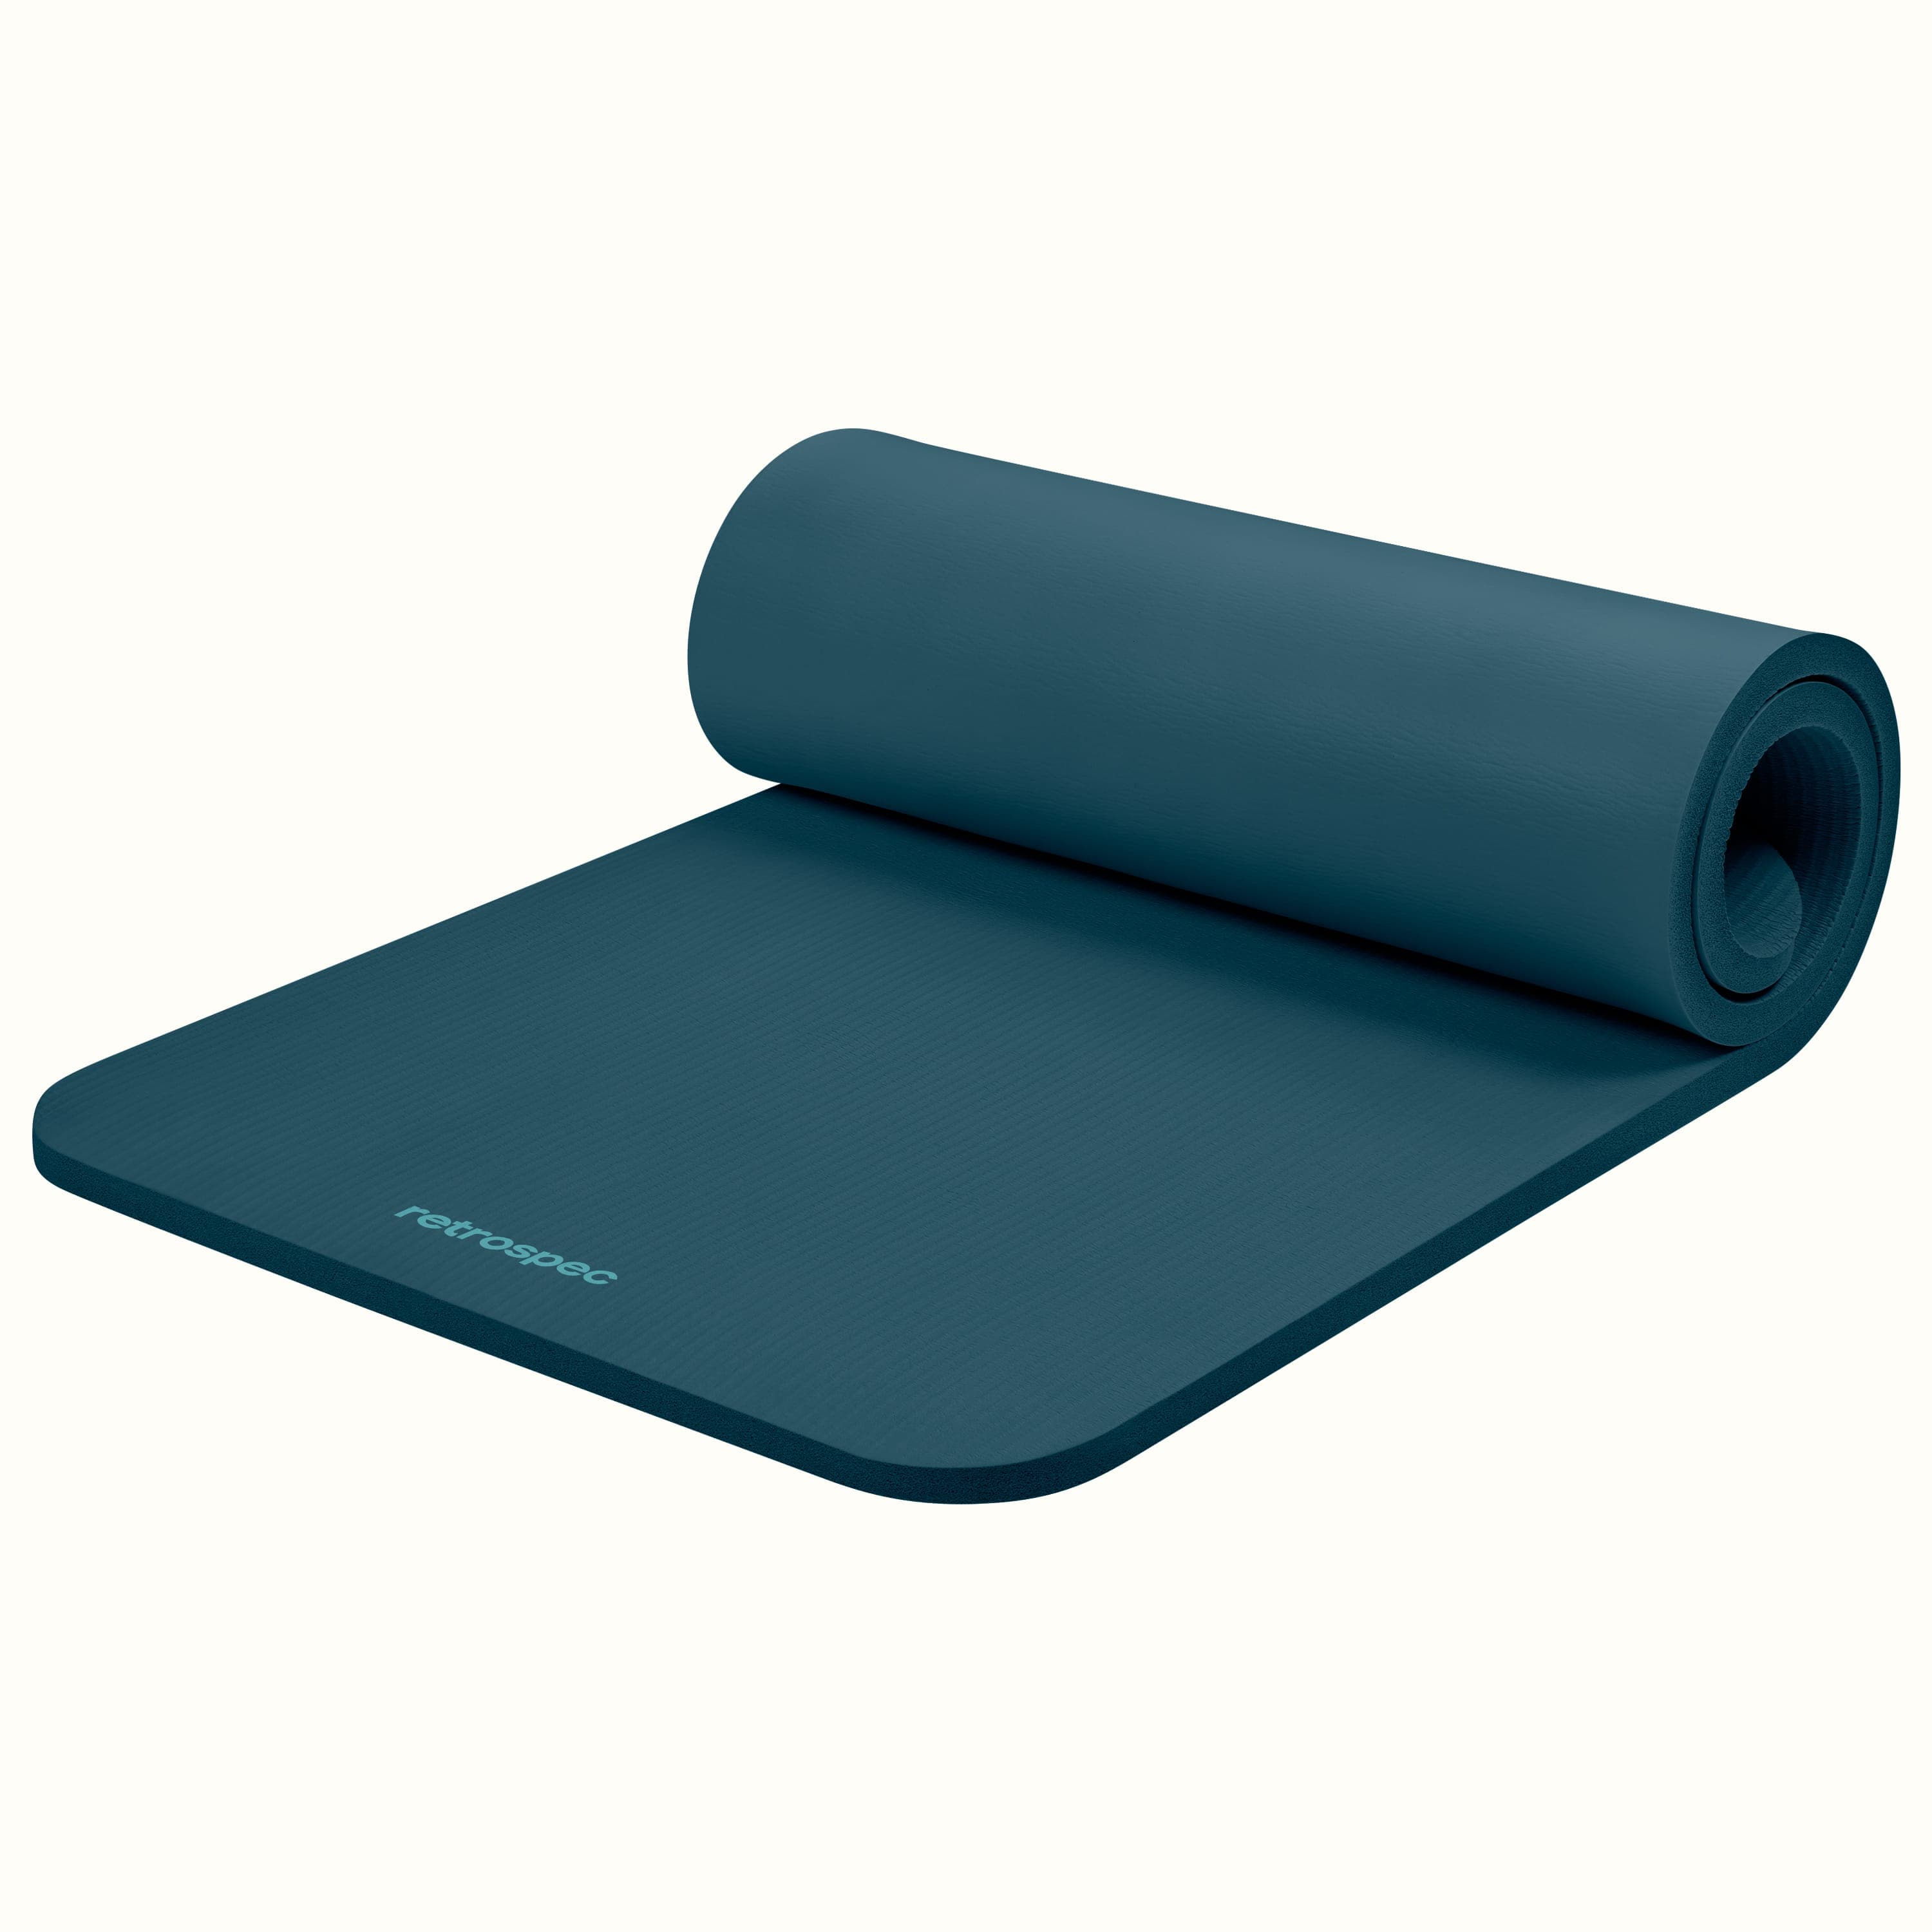 23 Best Yoga Mats & Exercise Mats For Home Workouts